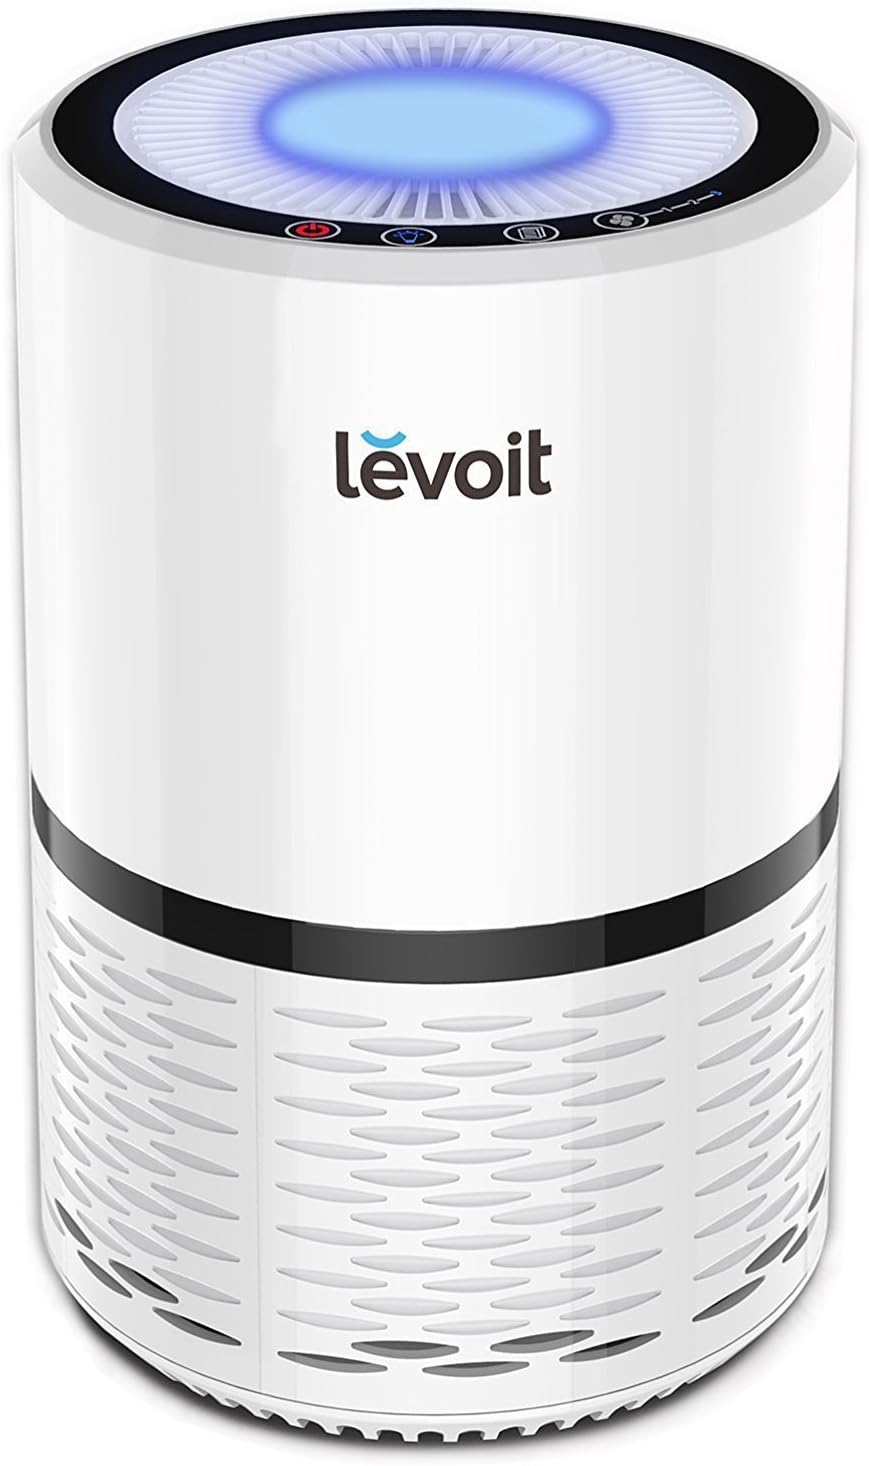 Levoit Air Purifier for Home with True HEPA Filter, 3 Speeds, Night Light & Filter Change Reminder, Portable Purifiers for Dust, Smokers, Pollen, Pet Dander, Hay Fever, Cooking Smell, LV-H132 White [Energy Class A+]